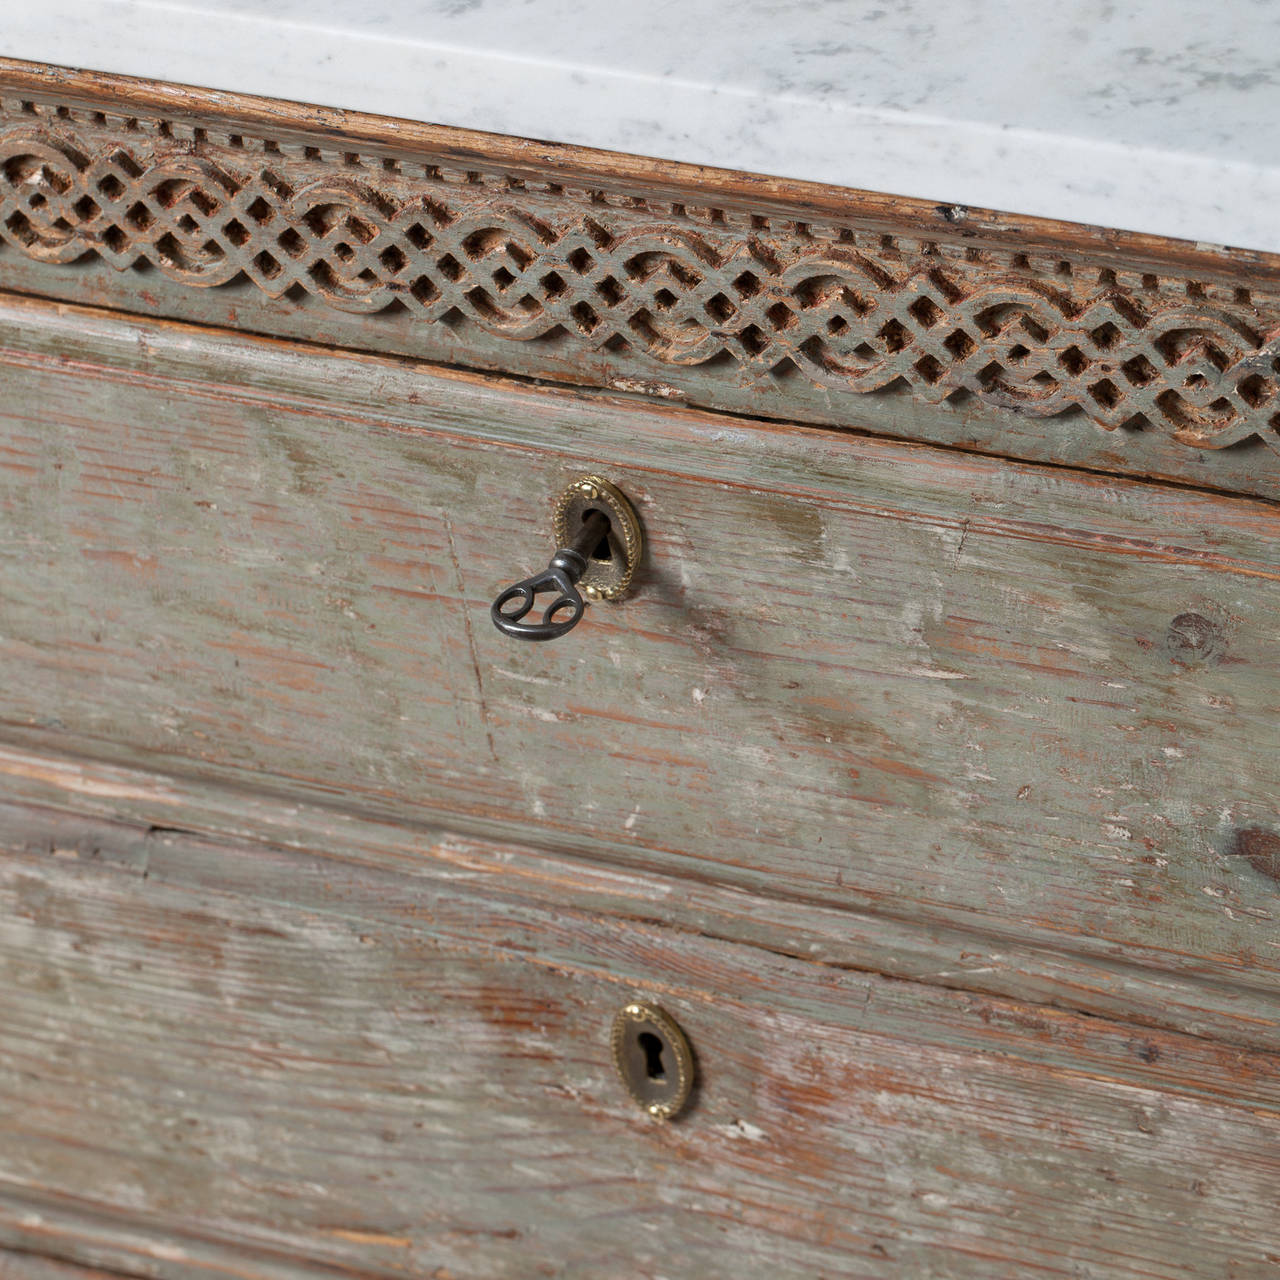 This charming three drawer Swedish chest has beautifully detailed carving on the front and curved fluted legs. The marble top is antique Swedish marble. It is a very useful piece that could go beside a bed or in an entryway or bathroom. The pale